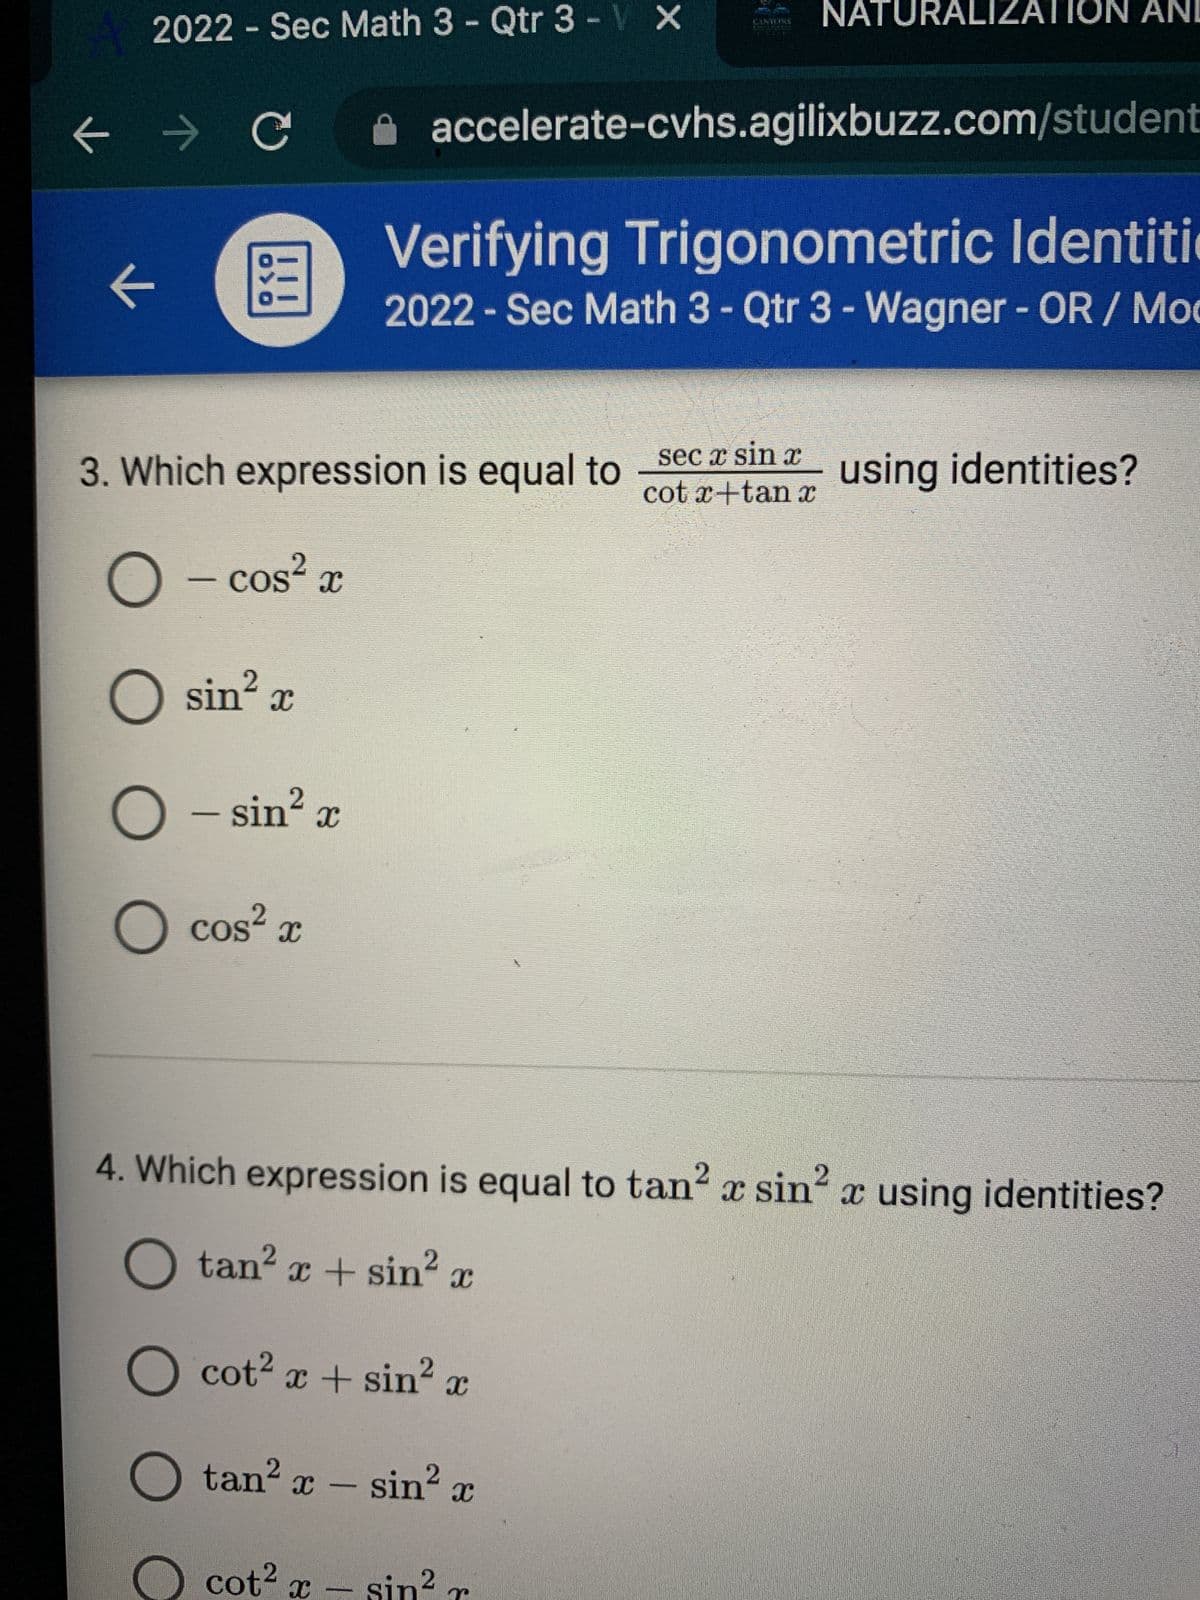 **Verifying Trigonometric Identities**

**2022 - Sec Math 3 - Qtr 3 - Wagner - OR / Moore**

---

### Question 3

**Which expression is equal to \(\frac{\sec x \sin x}{\cot x + \tan x}\) using identities?**

Options:
- \(\cos^2 x\)
- \(\sin^2 x\)
- \(\cos^2 x\)

---

### Question 4

**Which expression is equal to \(\tan^2 x \sin^2 x\) using identities?**

Options:
- \(\tan^2 x + \sin^2 x\)
- \(\cot^2 x + \sin^2 x\)
- \(\tan^2 x - \sin^2 x\)
- \(\cot^2 x - \sin^2 x\)

---

**Explanation for Graphs or Diagrams:**

In this context, no graphs or diagrams are present in the image, only text-based multiple-choice questions. The questions are focused on verifying trigonometric identities, specifically simplifying given trigonometric expressions using known trigonometric identities.